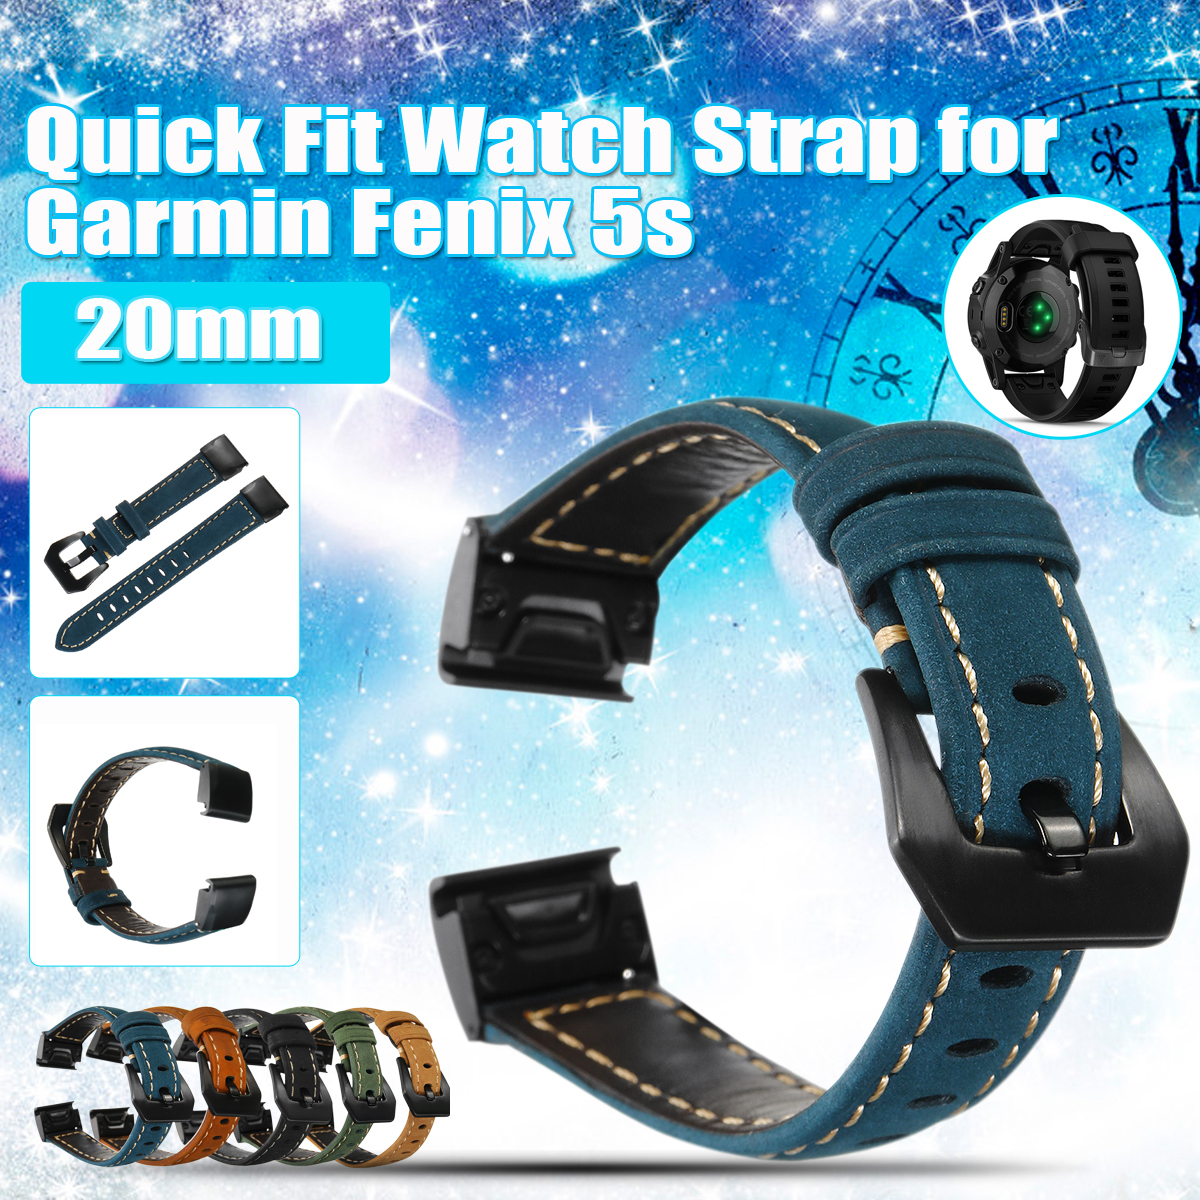 20mm-Leather-Watch-Strap-Quick-Fit-Watch-Band-Replacement-for-Garmin-Fenix-5s-Smart-Watch-1674155-1